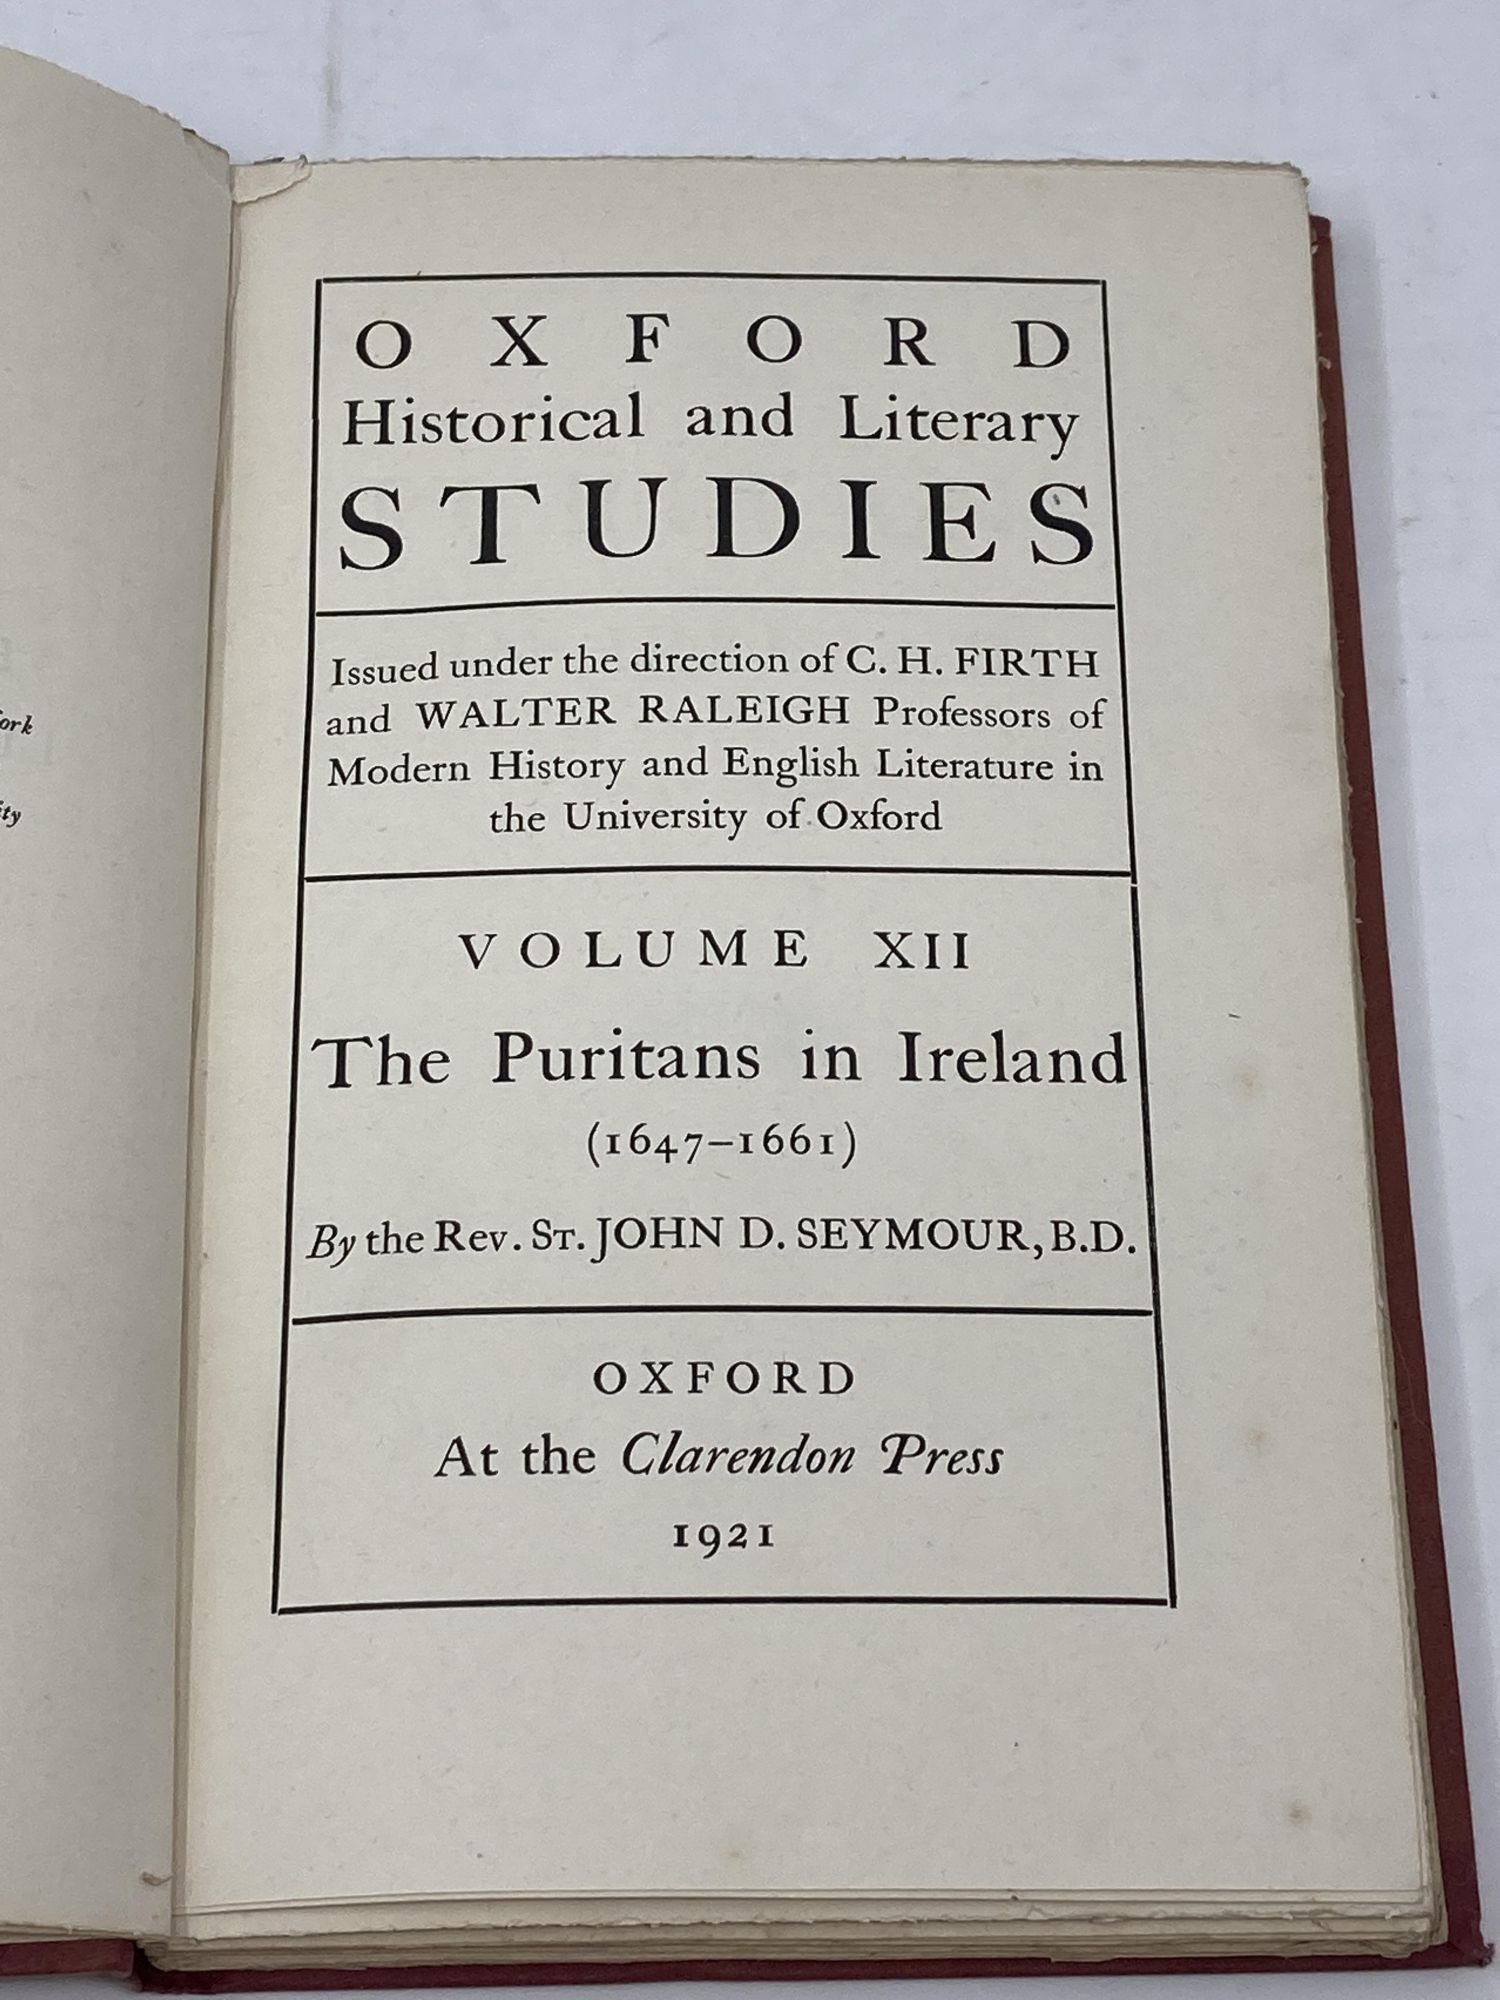 Seymour, John D. - Oxford Historical and Literary Studies Issued Under the Direction of C.H. Firth and Walter Raleigh Professors of Modern History and English Literature in the University of Oxford, Volume XII, the Puritans of Ireland (1647 - 1661)